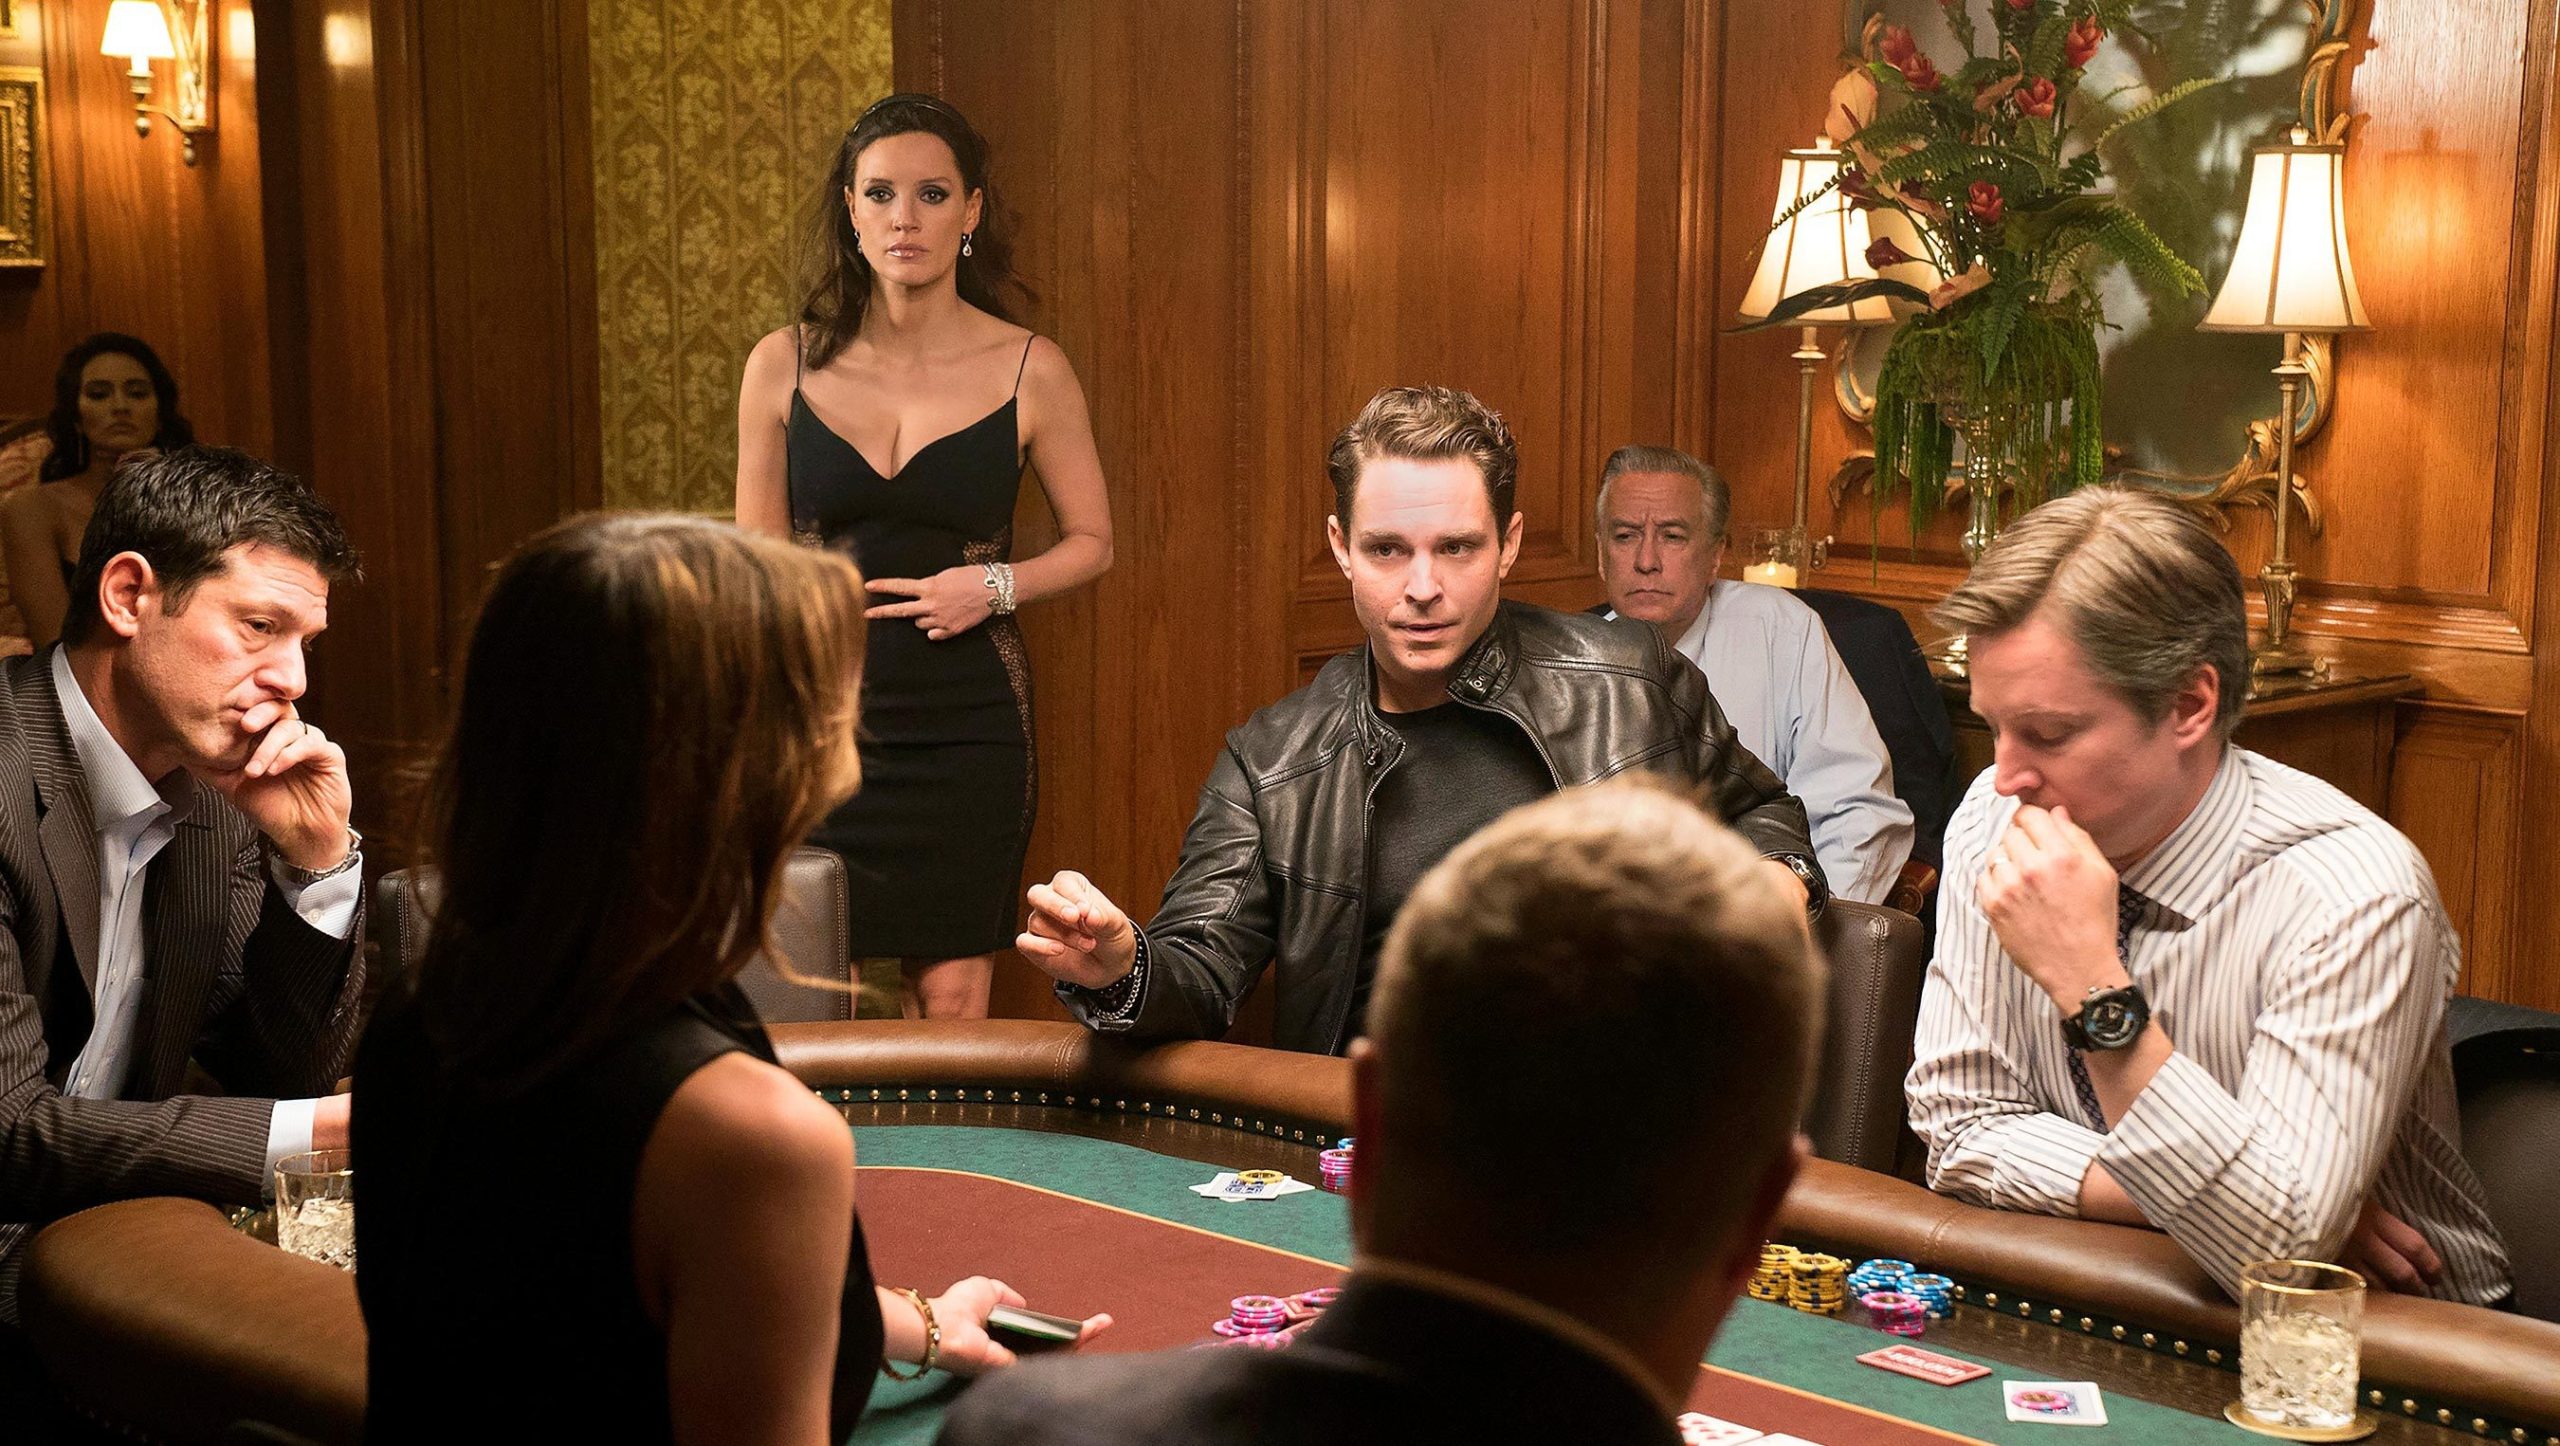 5 Best Movies to Watch to Improve Your Gambling Skills